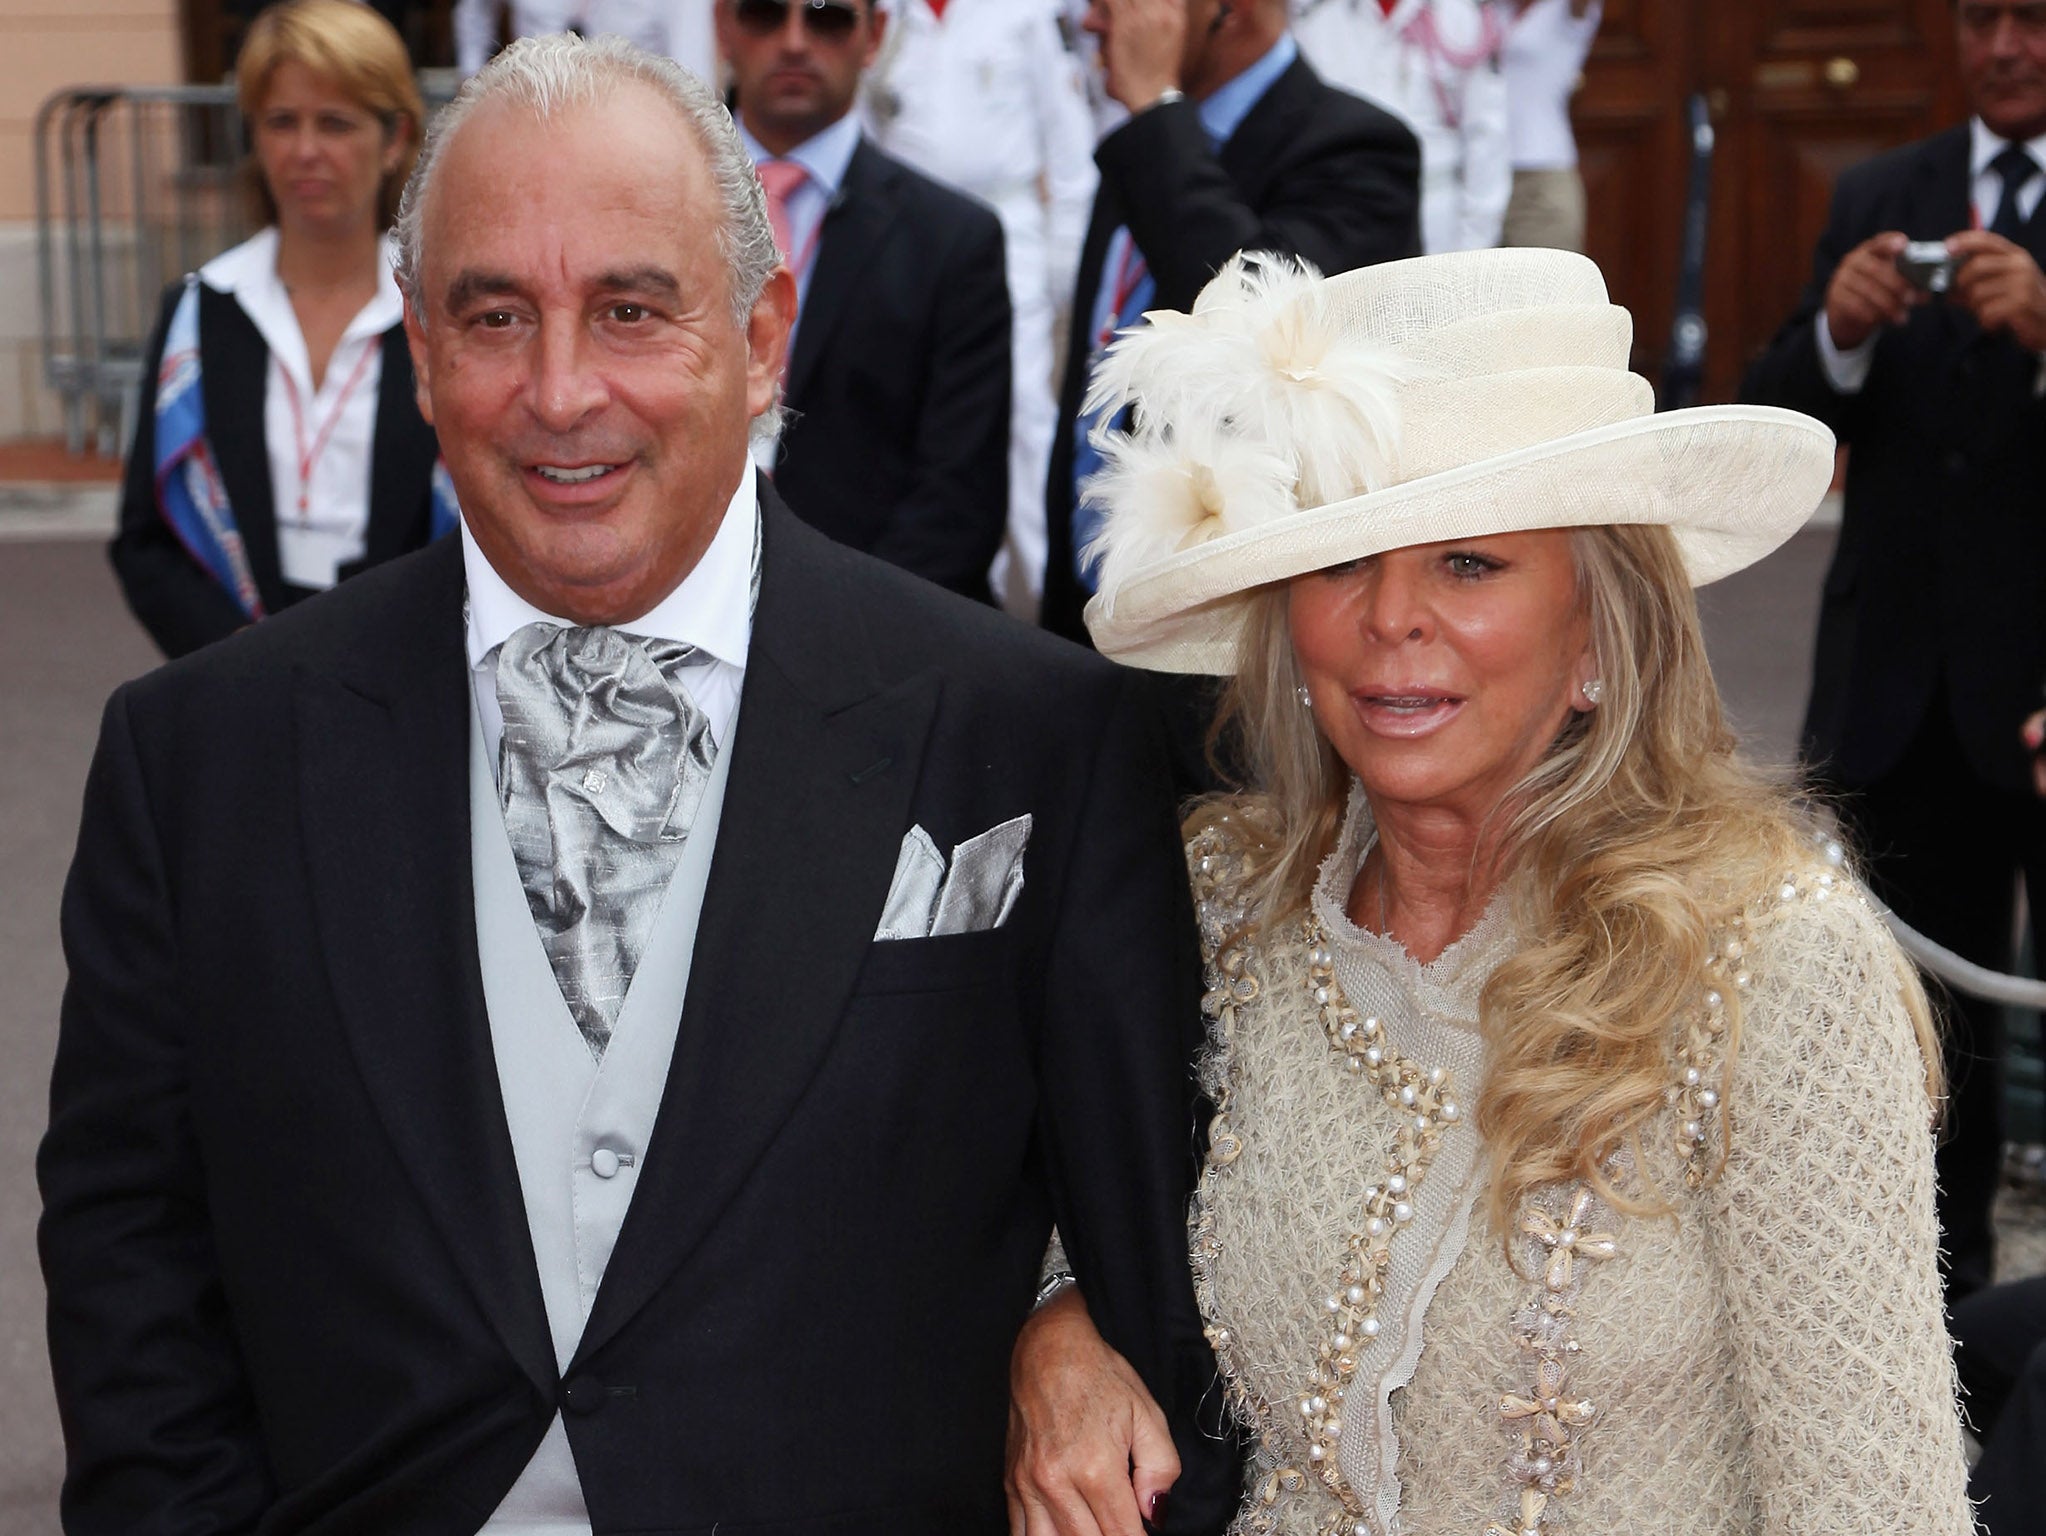 Sir Philip Green and wife Tina Green at a wedding ceremony in Monaco